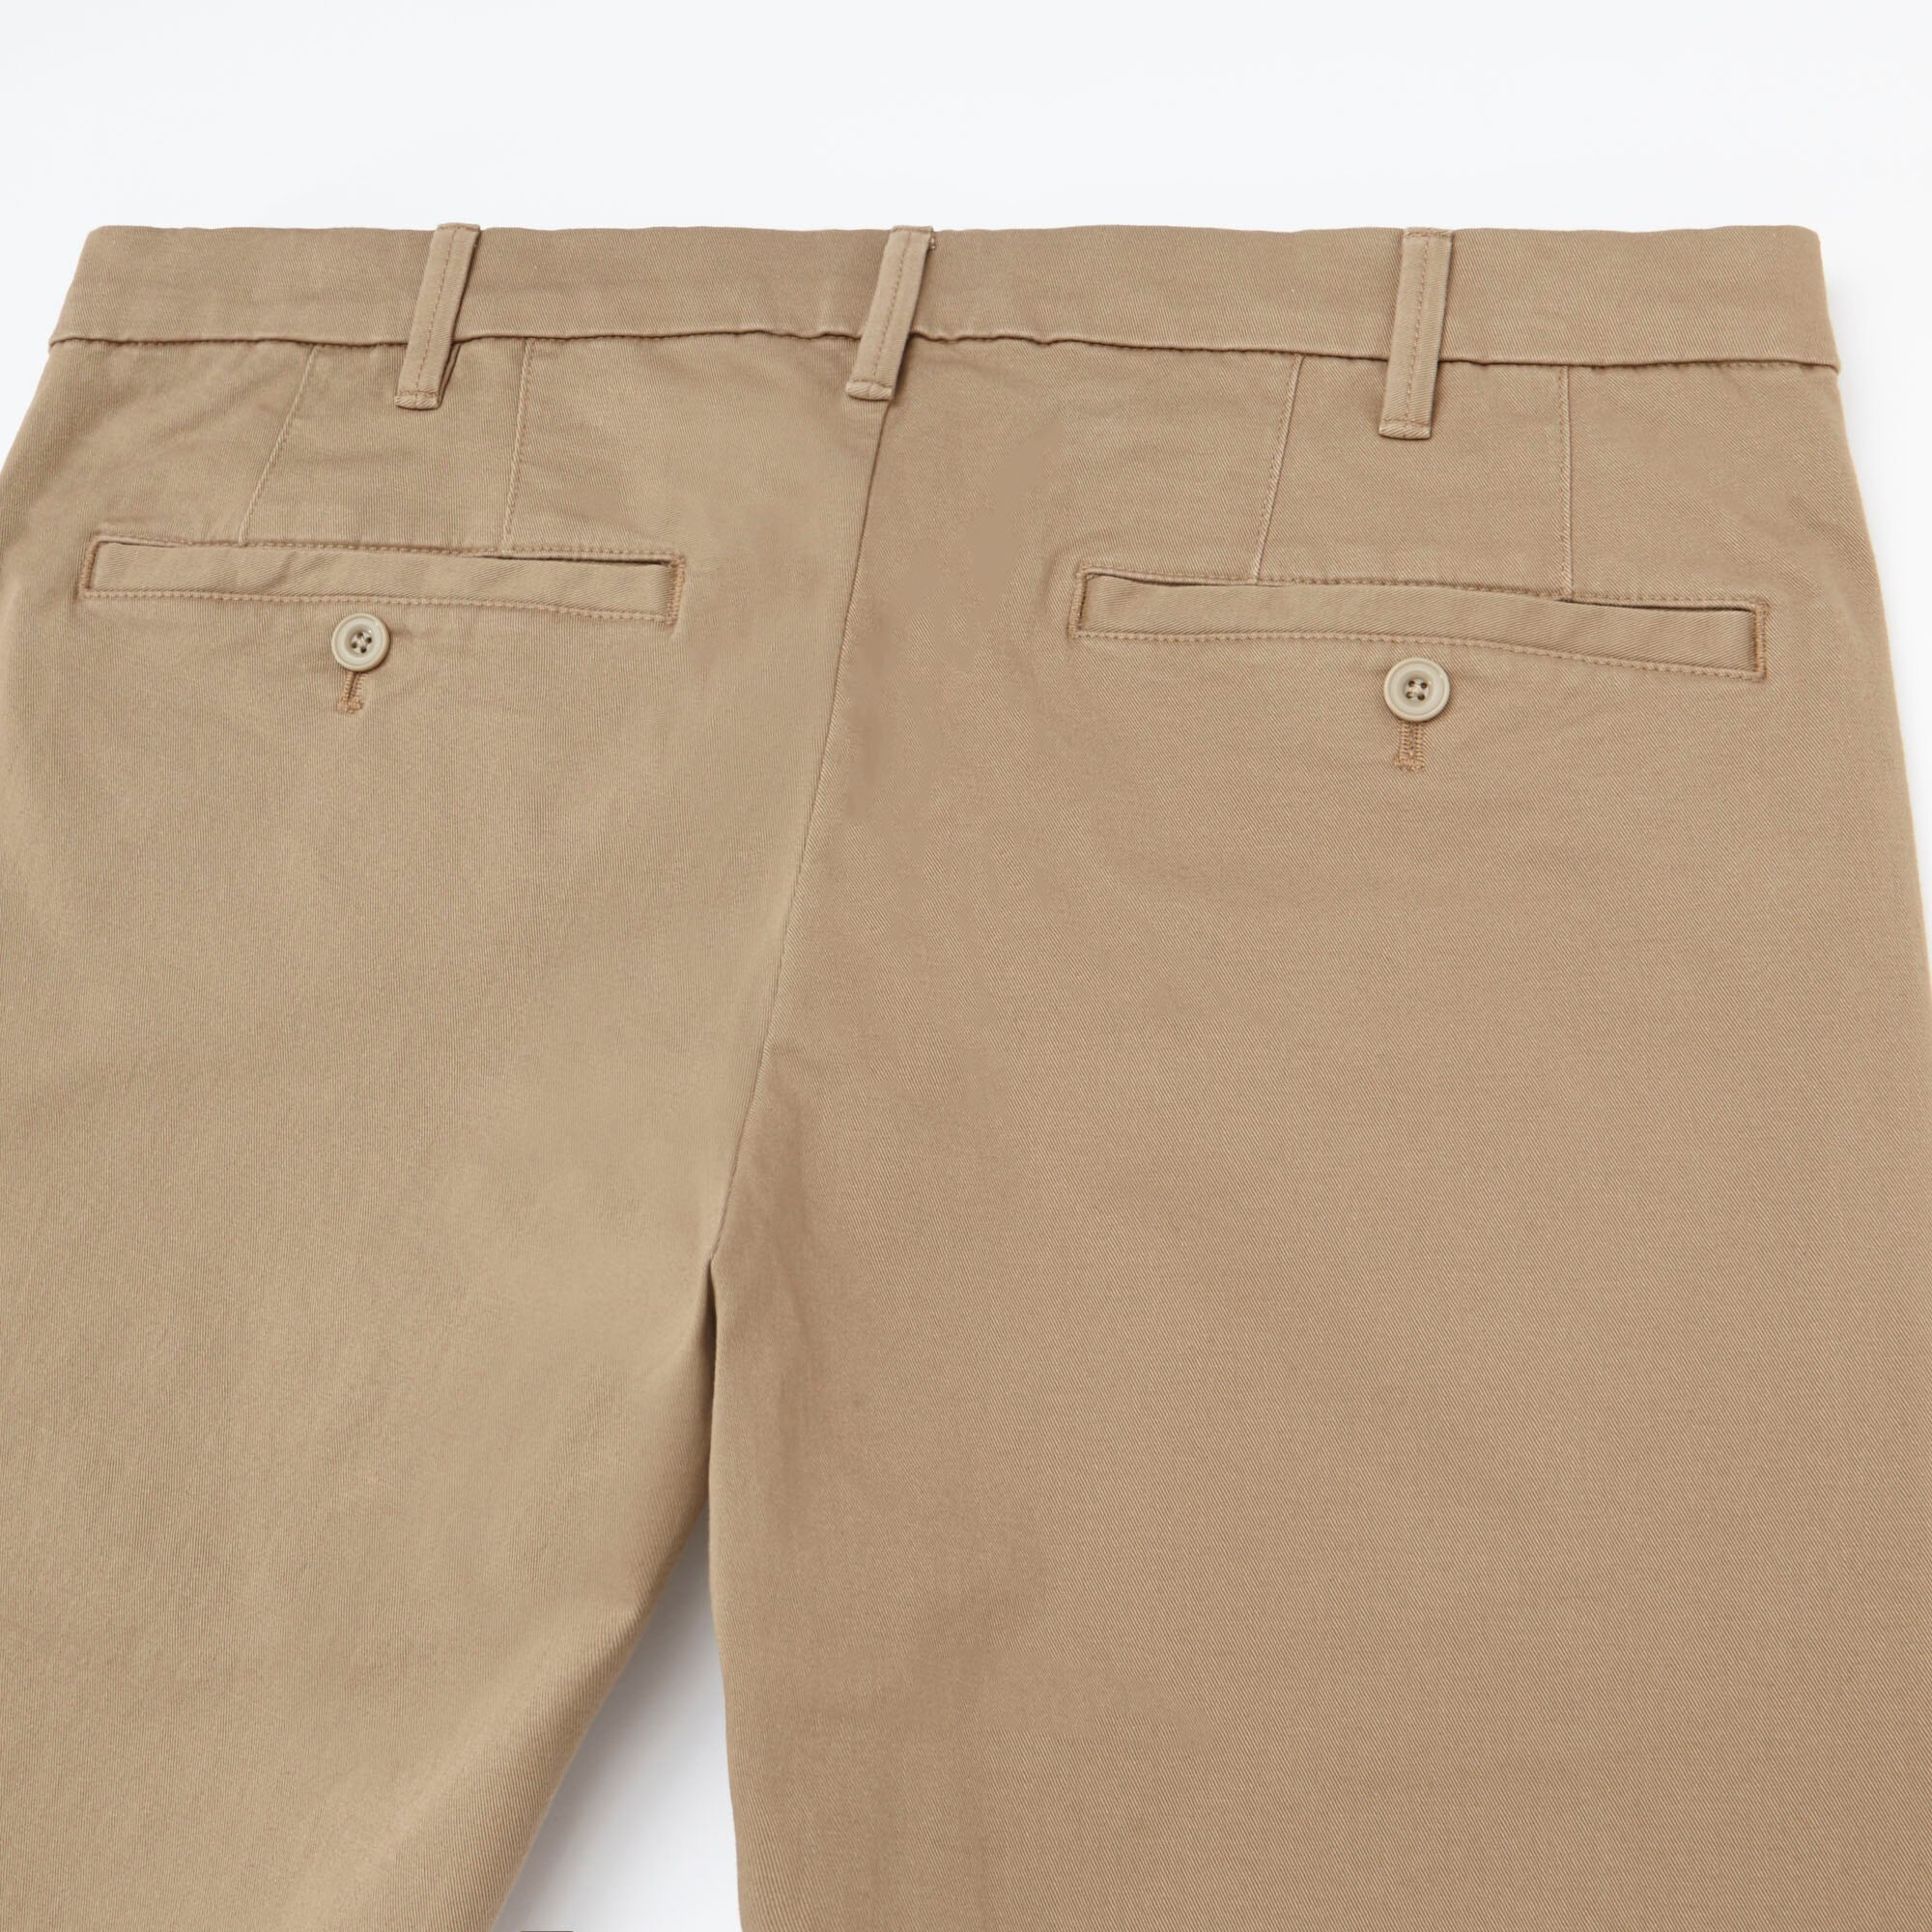 MEN ULTRA STRETCH SKINNY FIT CHINO FLAT FRONT PANTS | UNIQLO US